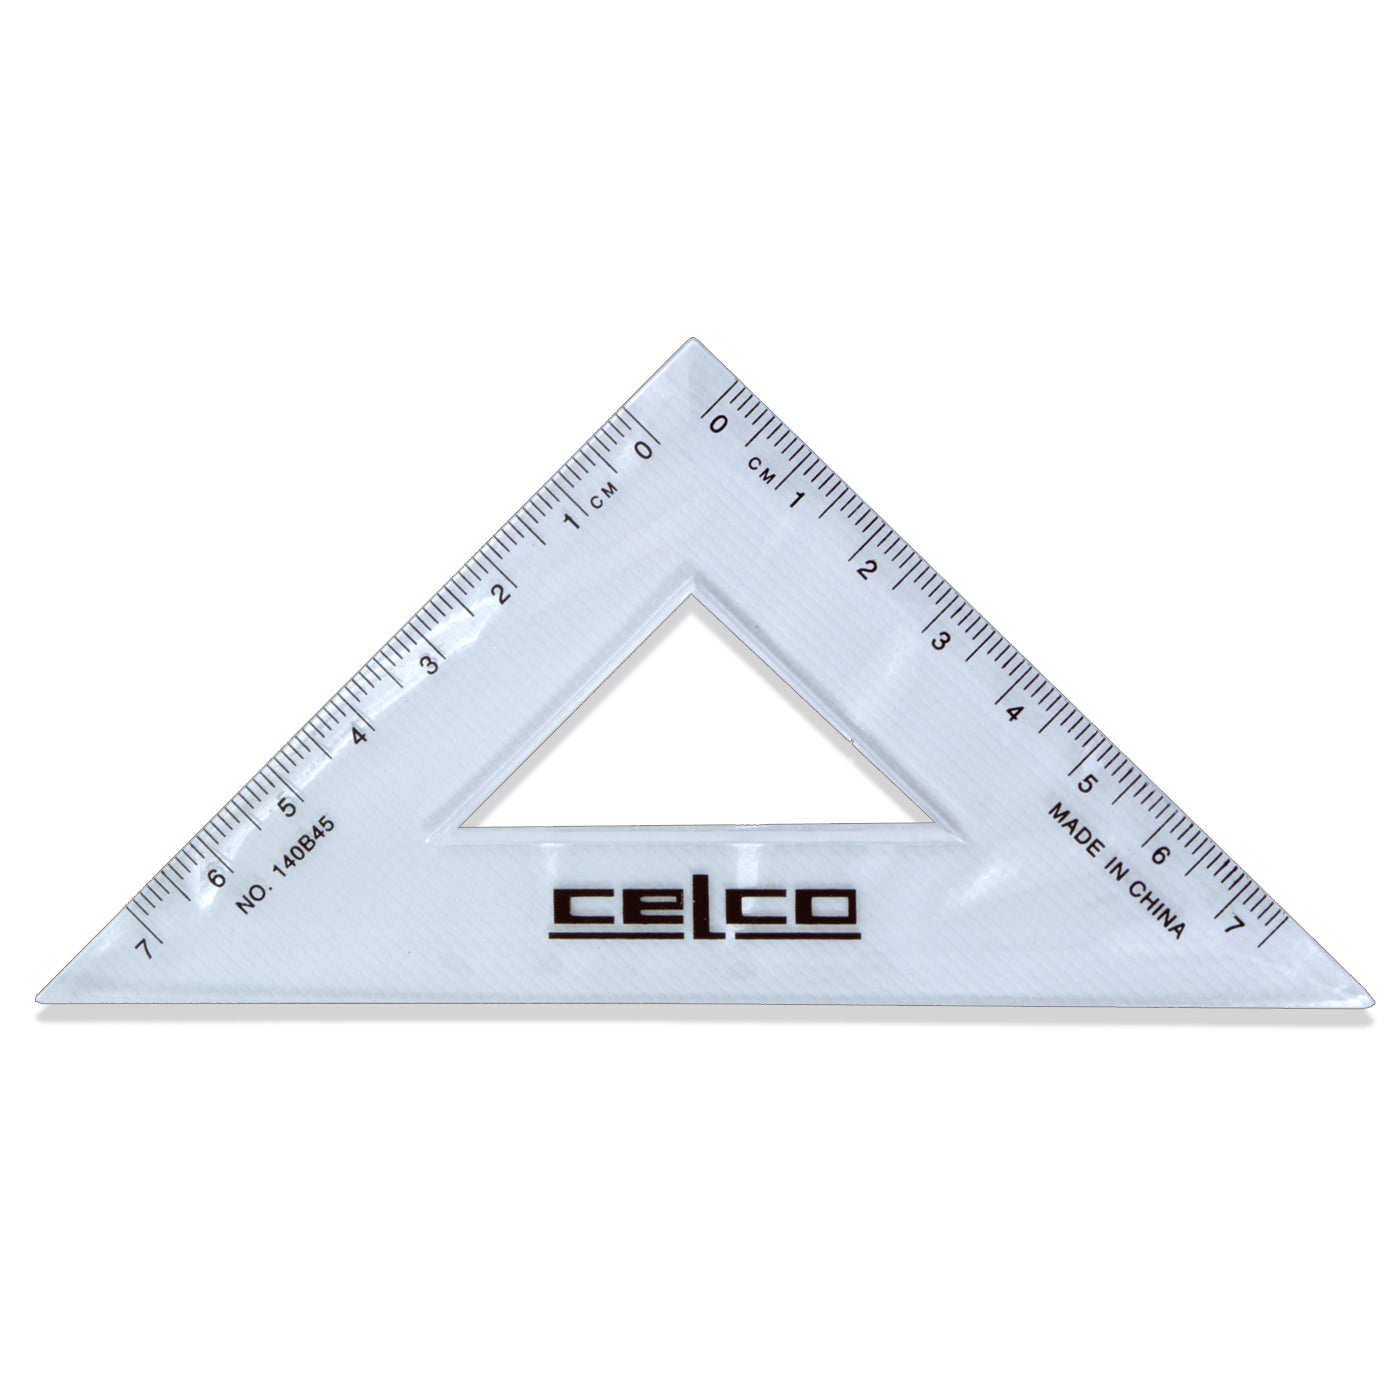 Celco 45 Degree Set Squares 14 cm Clear - School Depot